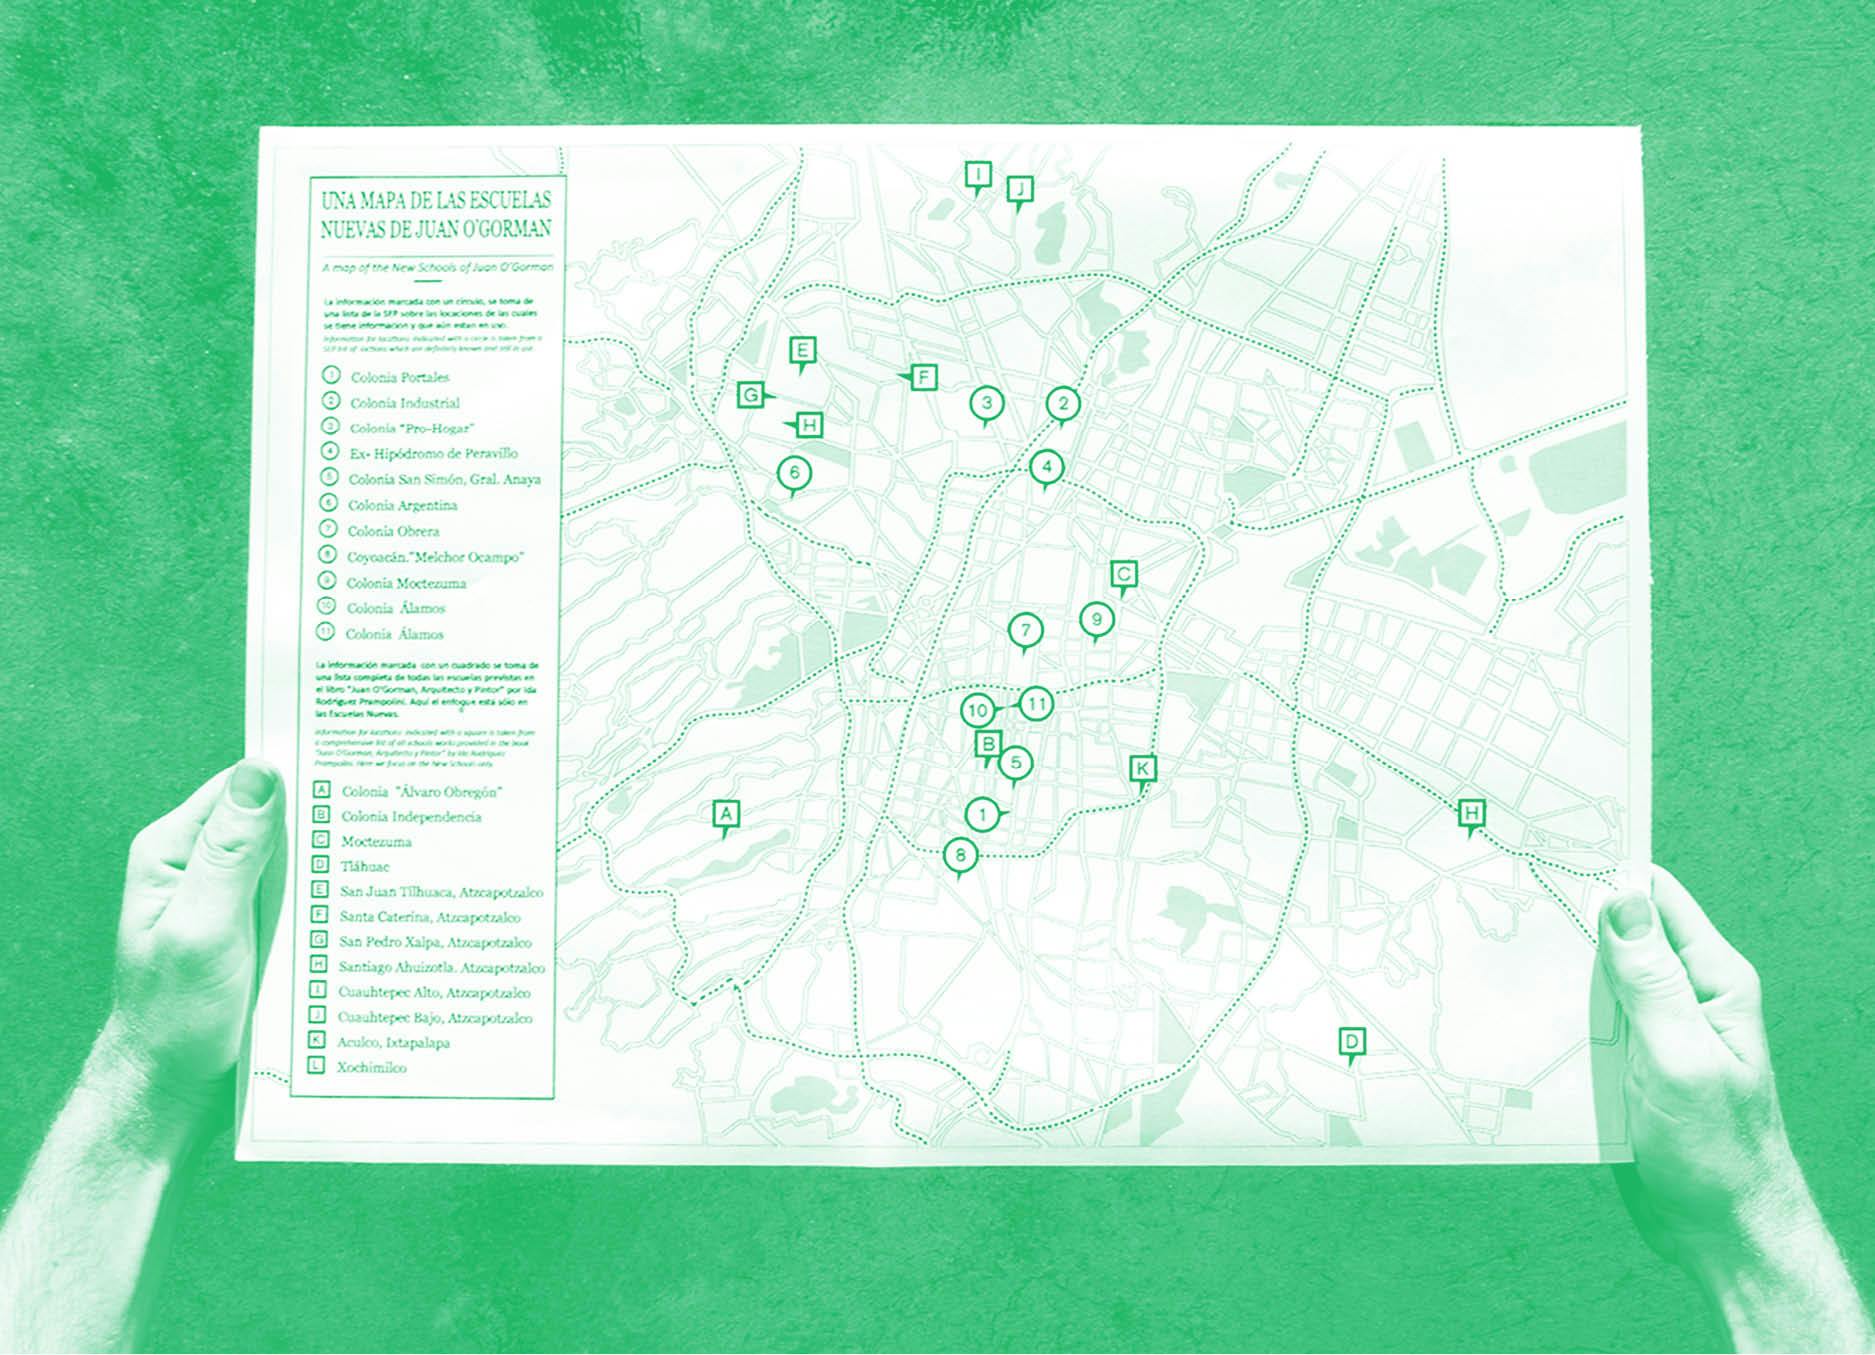 'Una Mapa Una Lista' by Henry Coleman produced for SOMA, Mexico City,  A green and white photograph of a pair of hands holding a map of the schools building program by the architect Juan O'Gorman